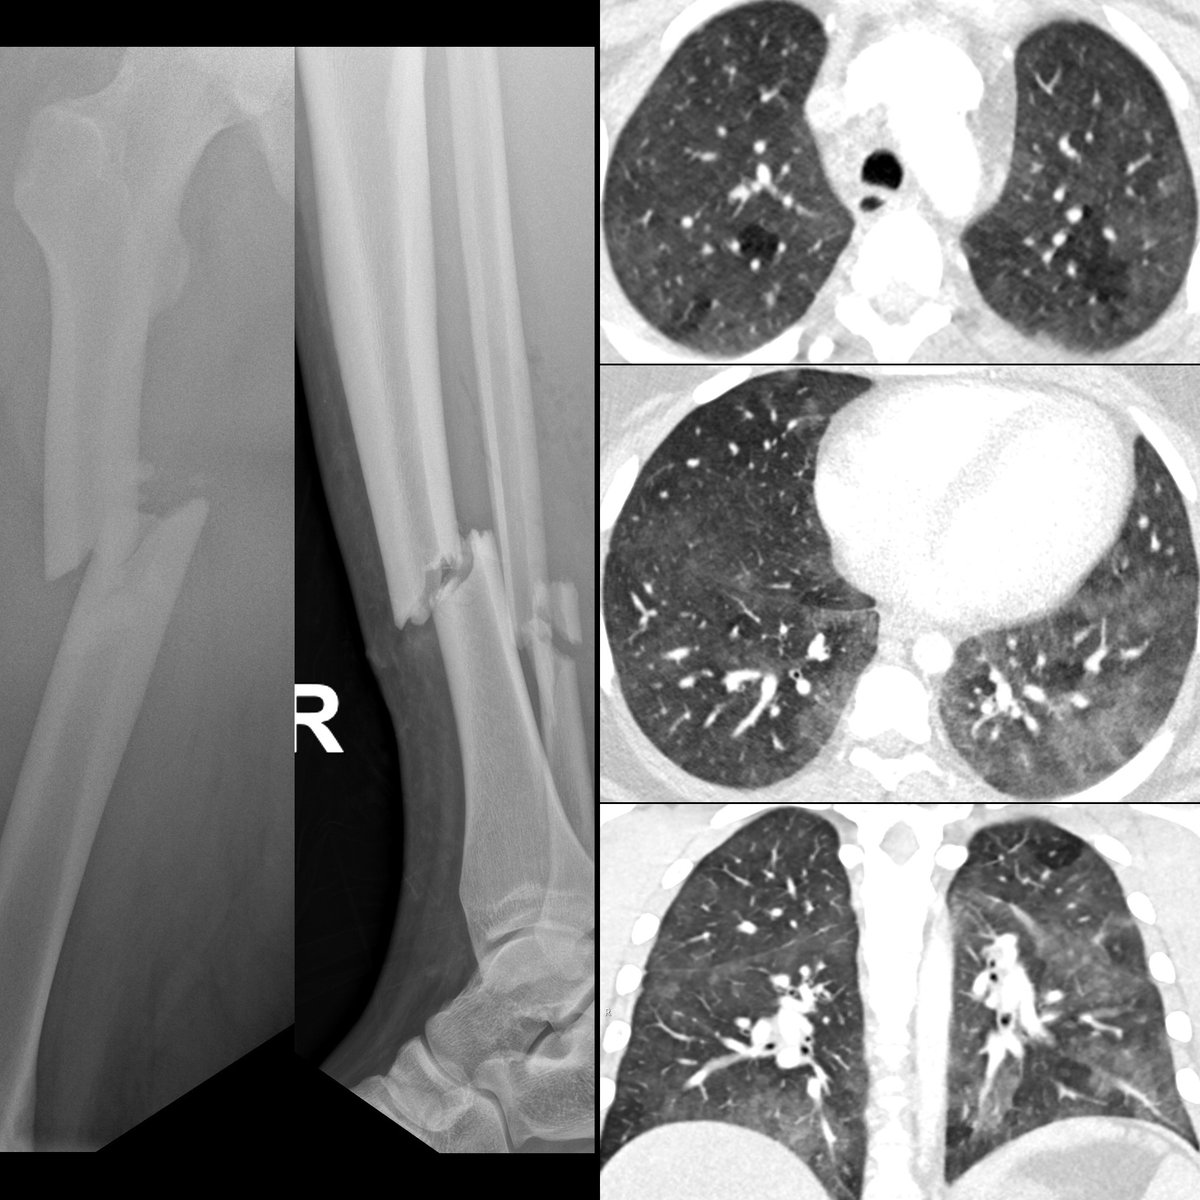 Teen with shortness of breath after motor vehicle accident

AP radiograph of right femur(left)+lateral radiograph of right tibia+fibula(middle) show comminuted fractures of femur, tibia+fibula.

#FOAMed #MedEd #FOAMPed #FOAMRad #PedsRad #RadEd #RadRes #radiology #FOAMcc #PedsICU